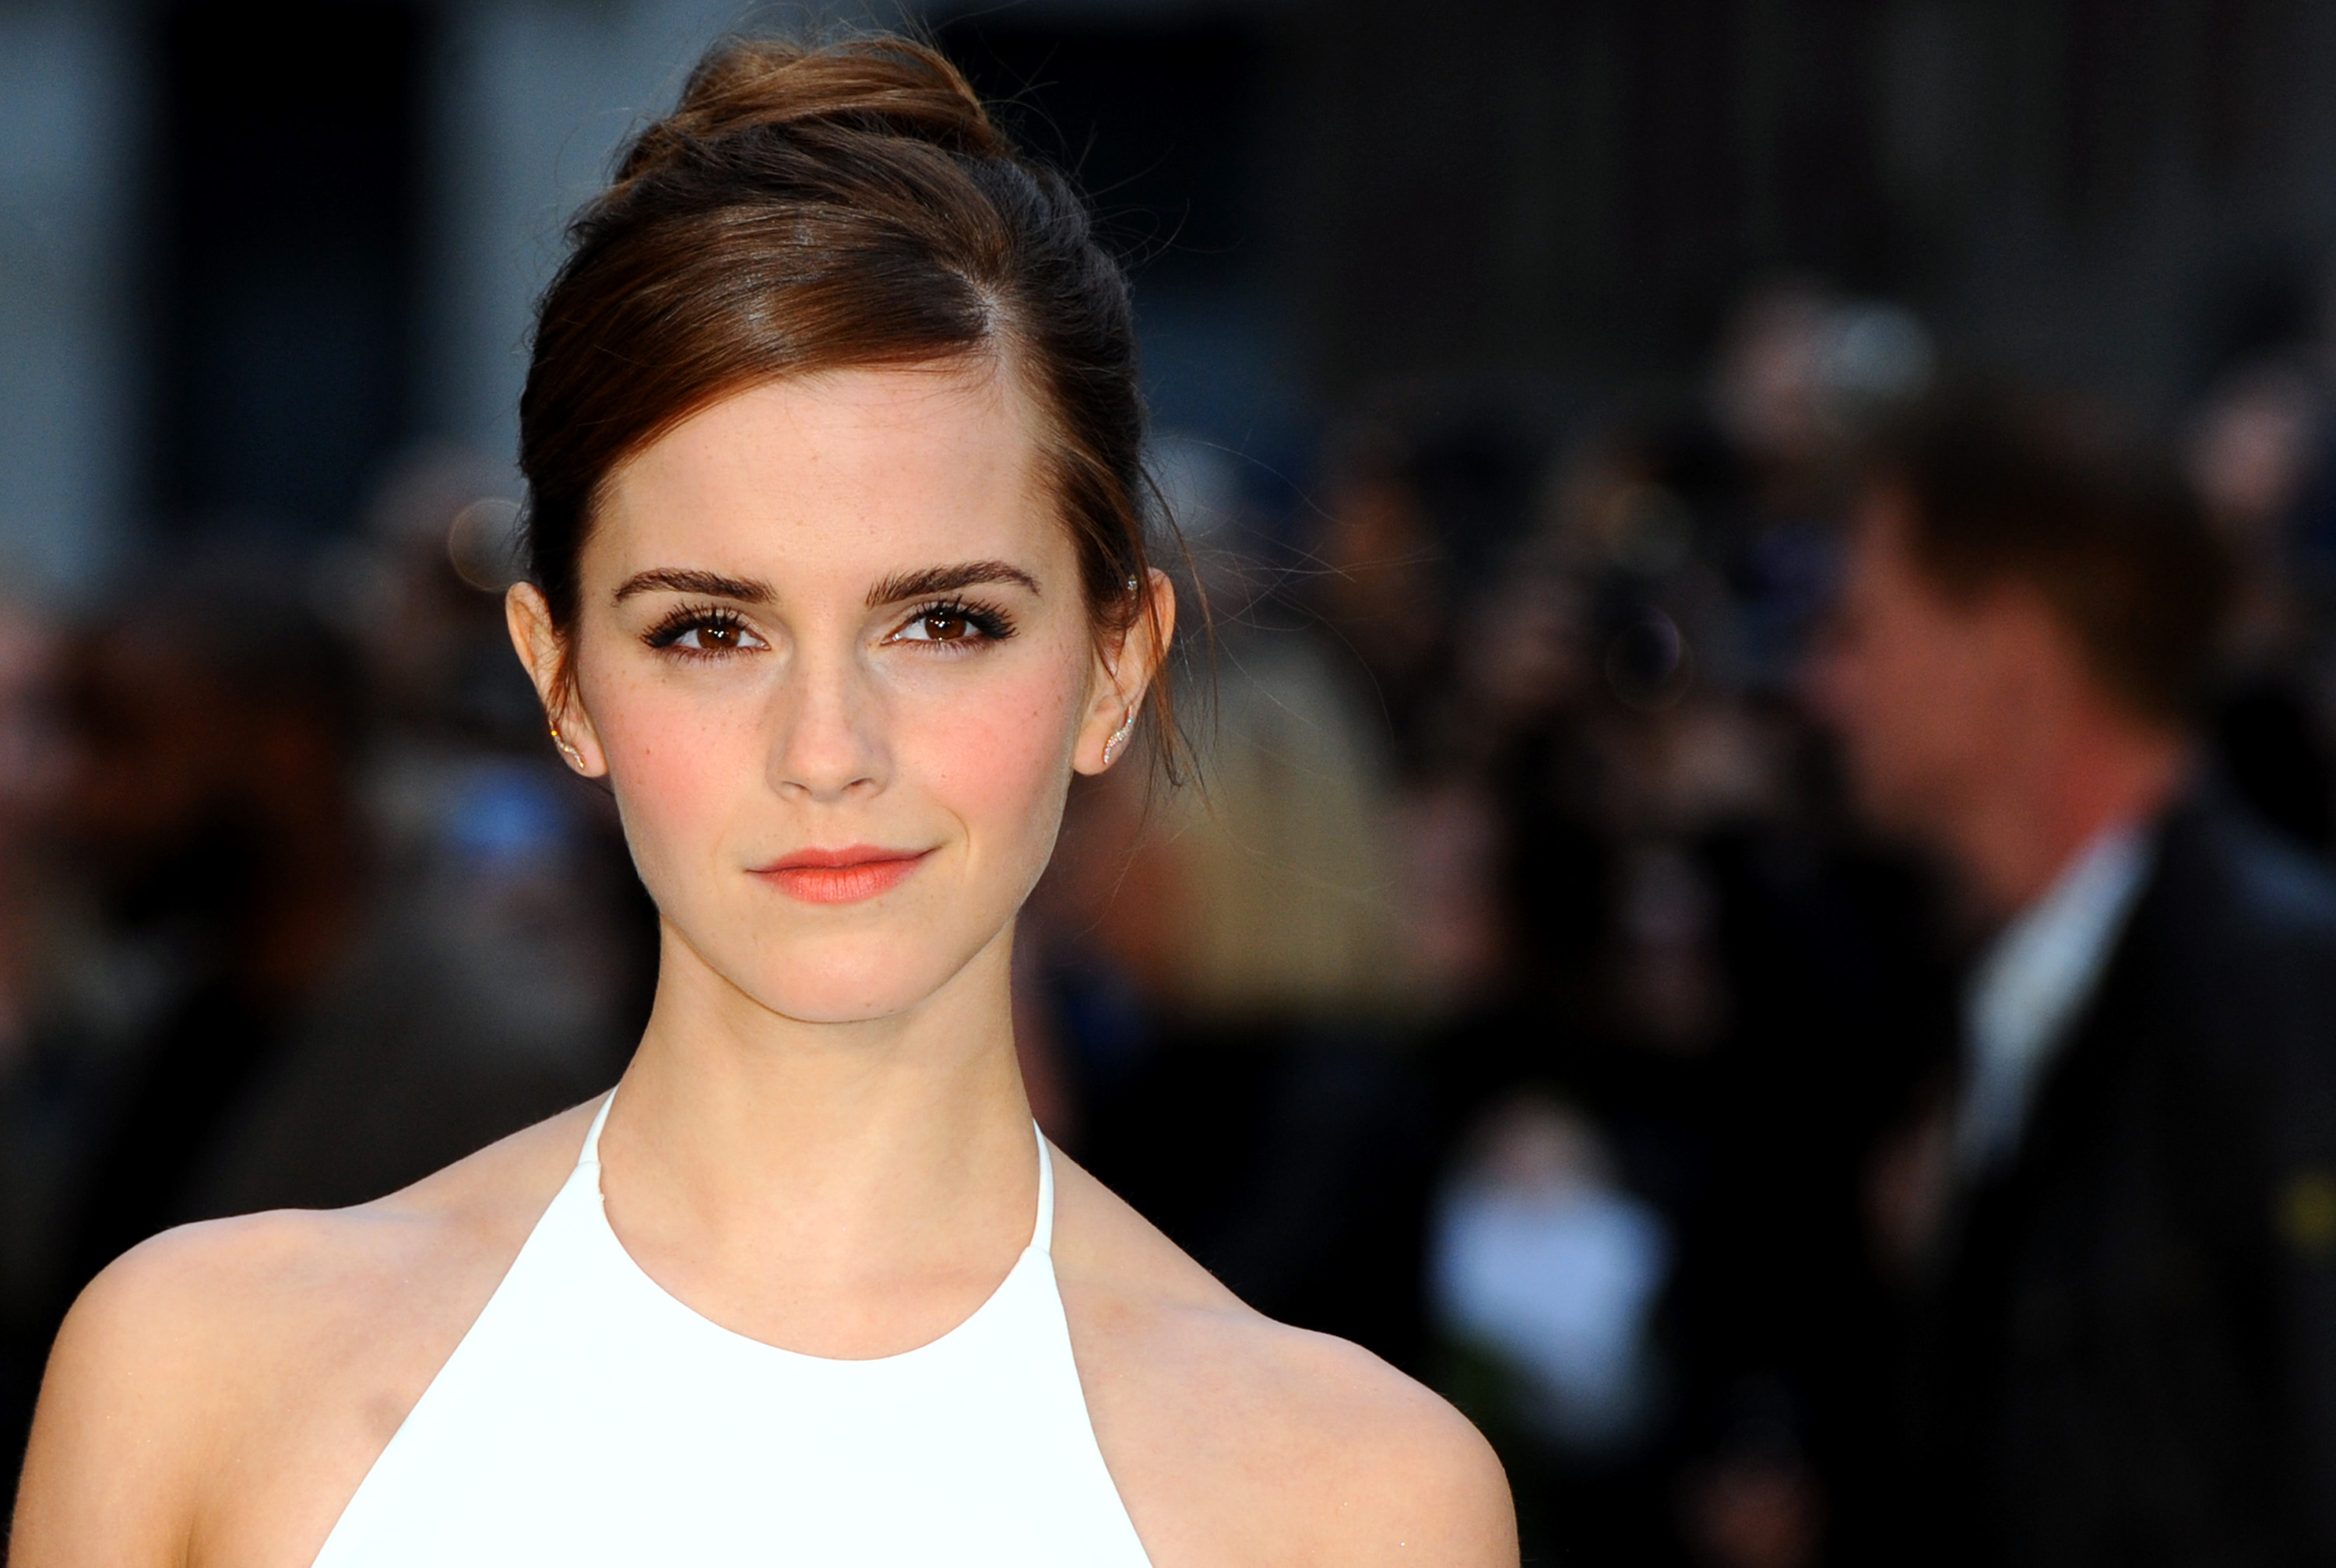 "I decided I was a feminist and this seemed uncomplicated to me," said <strong>Emma Watson</strong> at a UN Women speech in September. "Men-- I would like to take this opportunity to extend your formal invitation. Gender Equality is your issue, too." (Anthony Harvey—Getty Images)